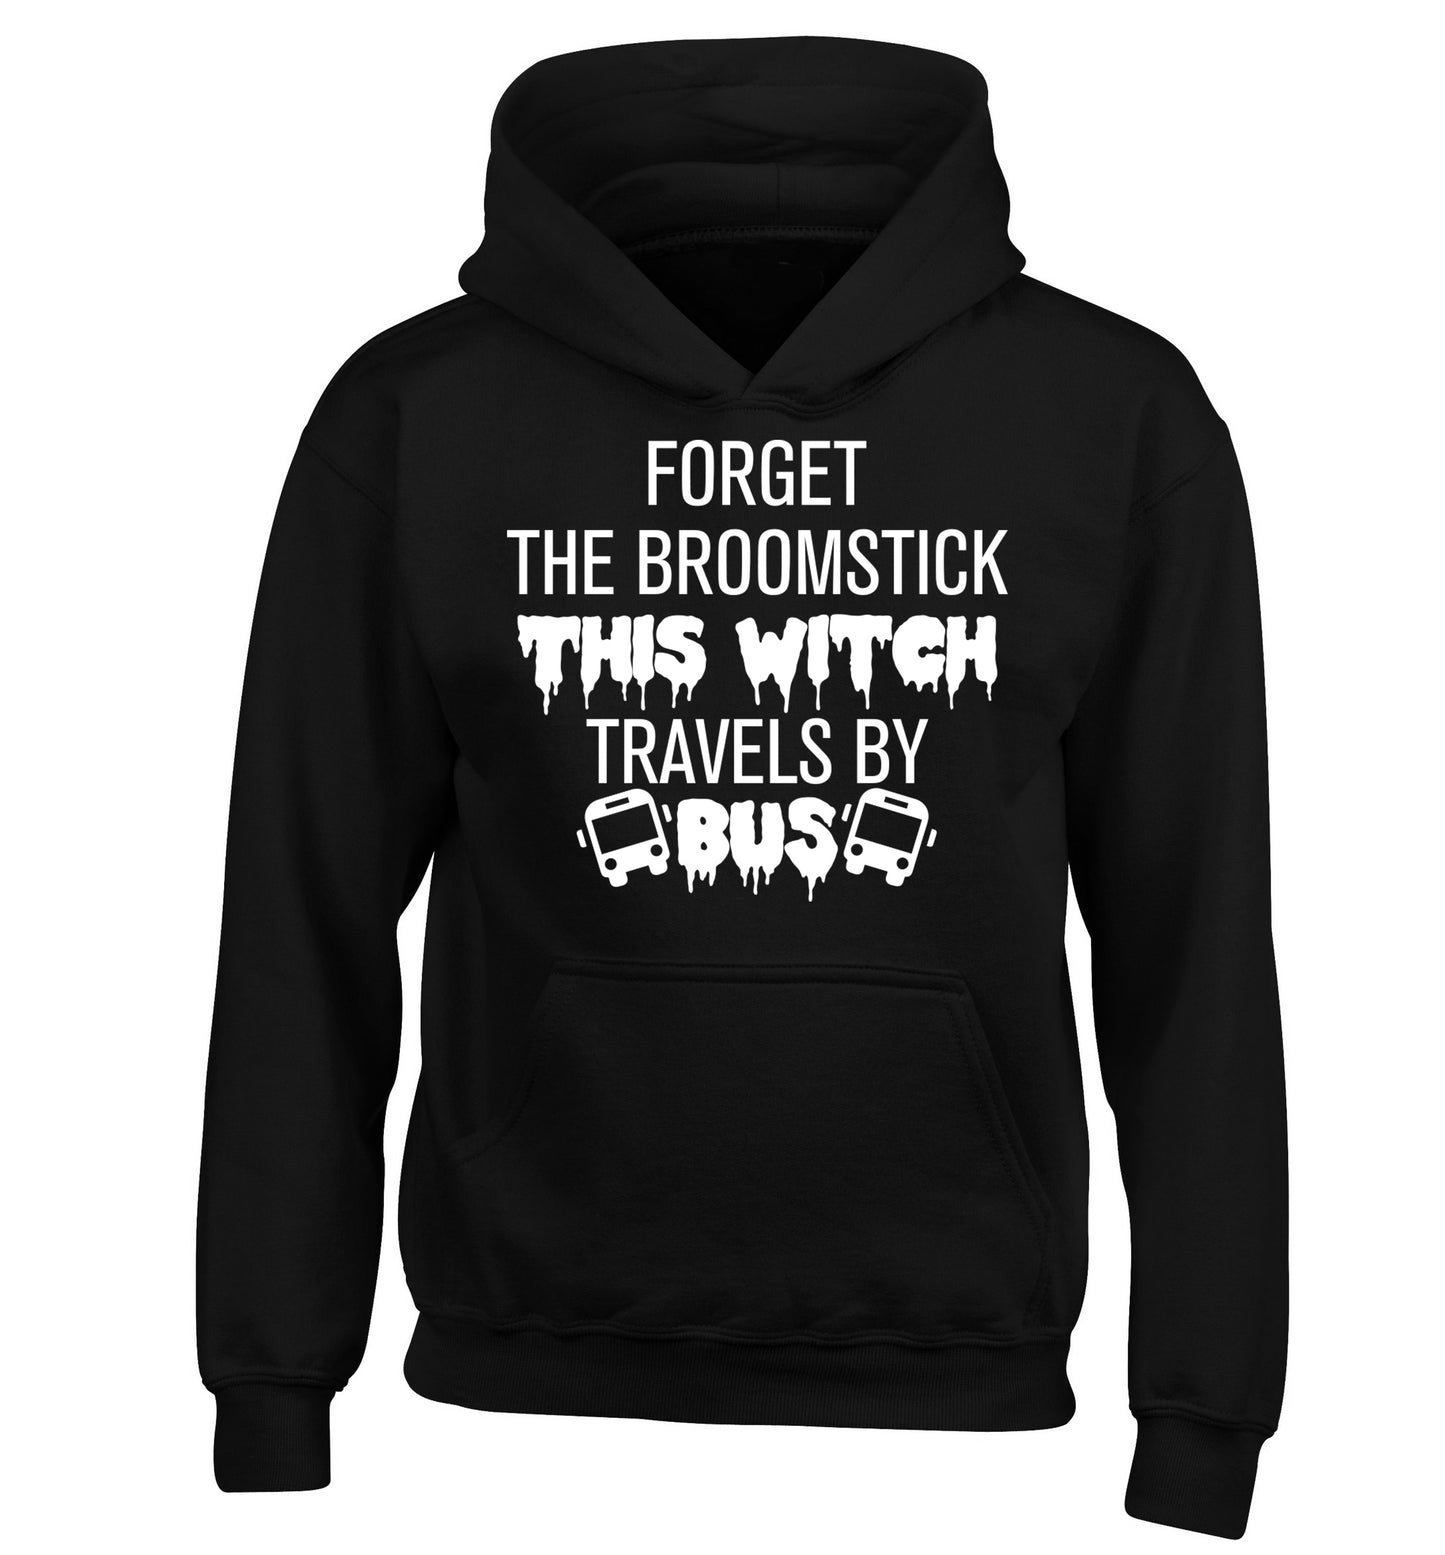 Forget the broomstick this witch travels by bus children's black hoodie 12-14 Years